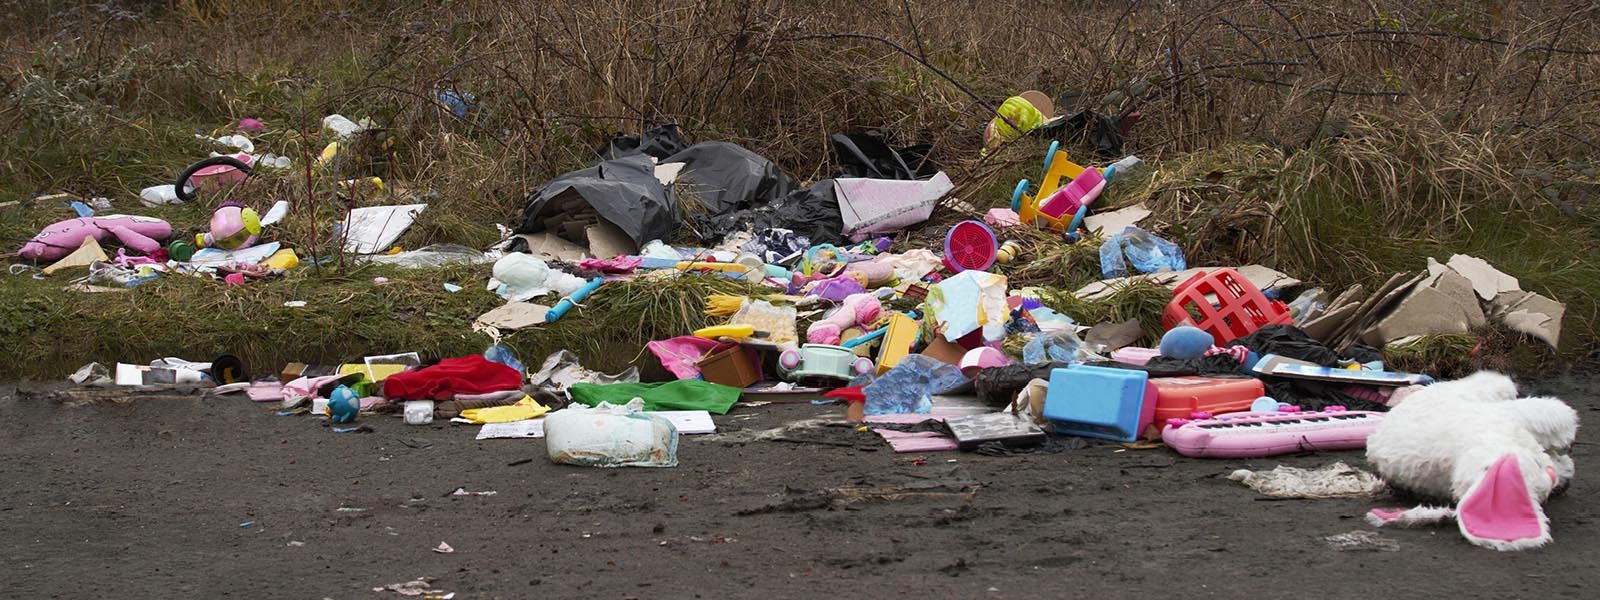 Pile of illegally dumped rubbish